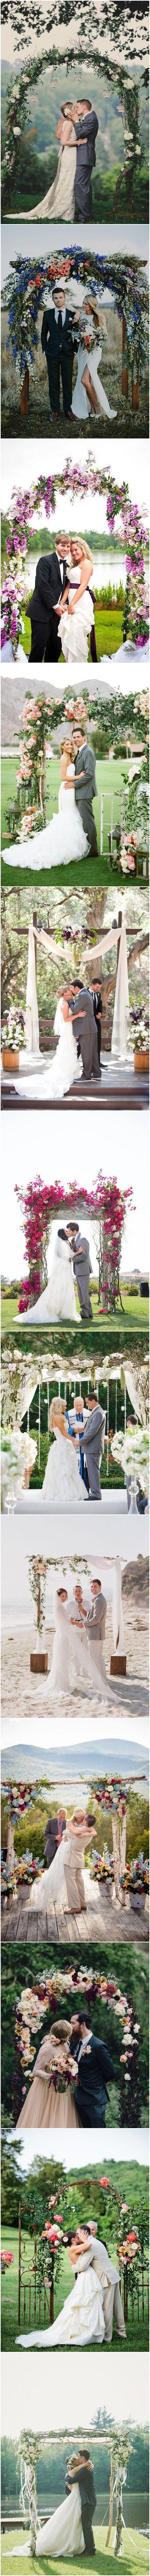 Mariage - 26 Floral Wedding Arches Decorating Ideas